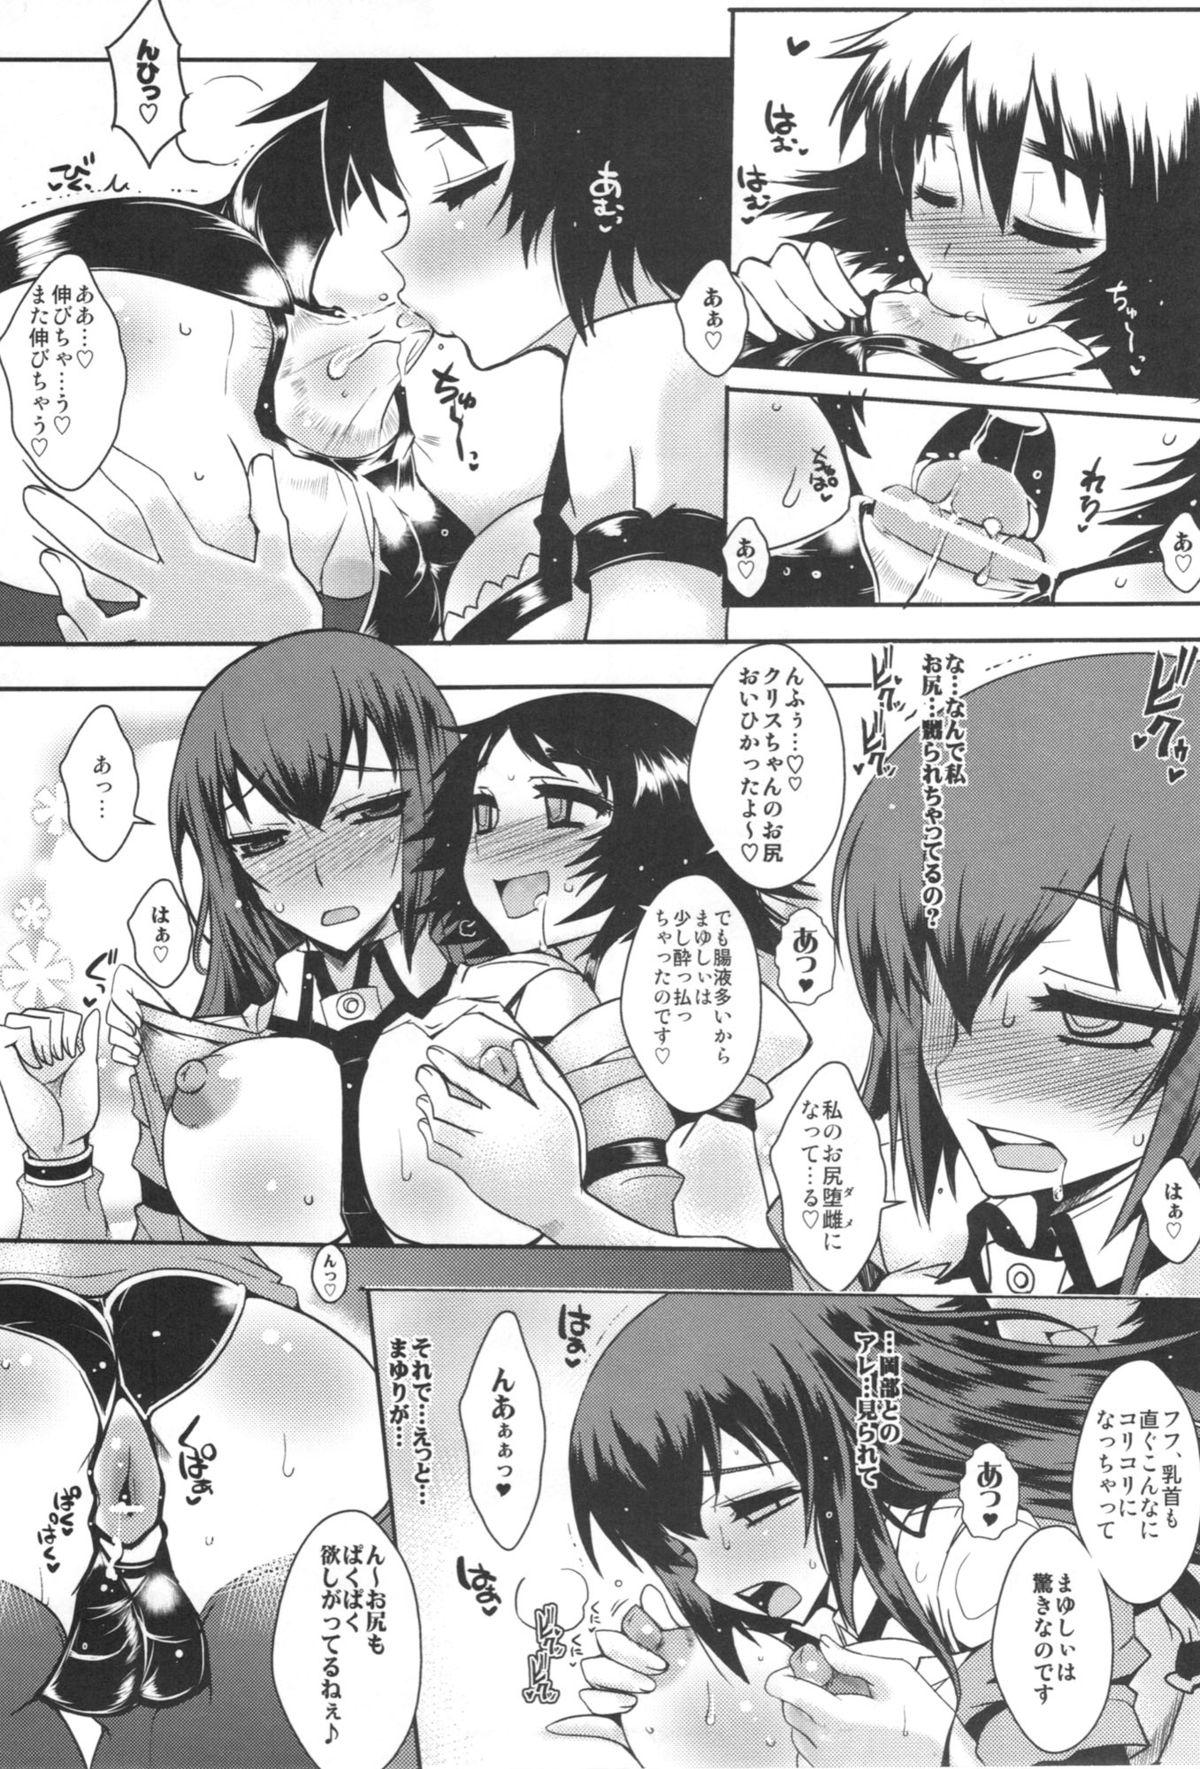 Muscles Shirikan Aikou no Sodominists - Steinsgate Big Cock - Page 5